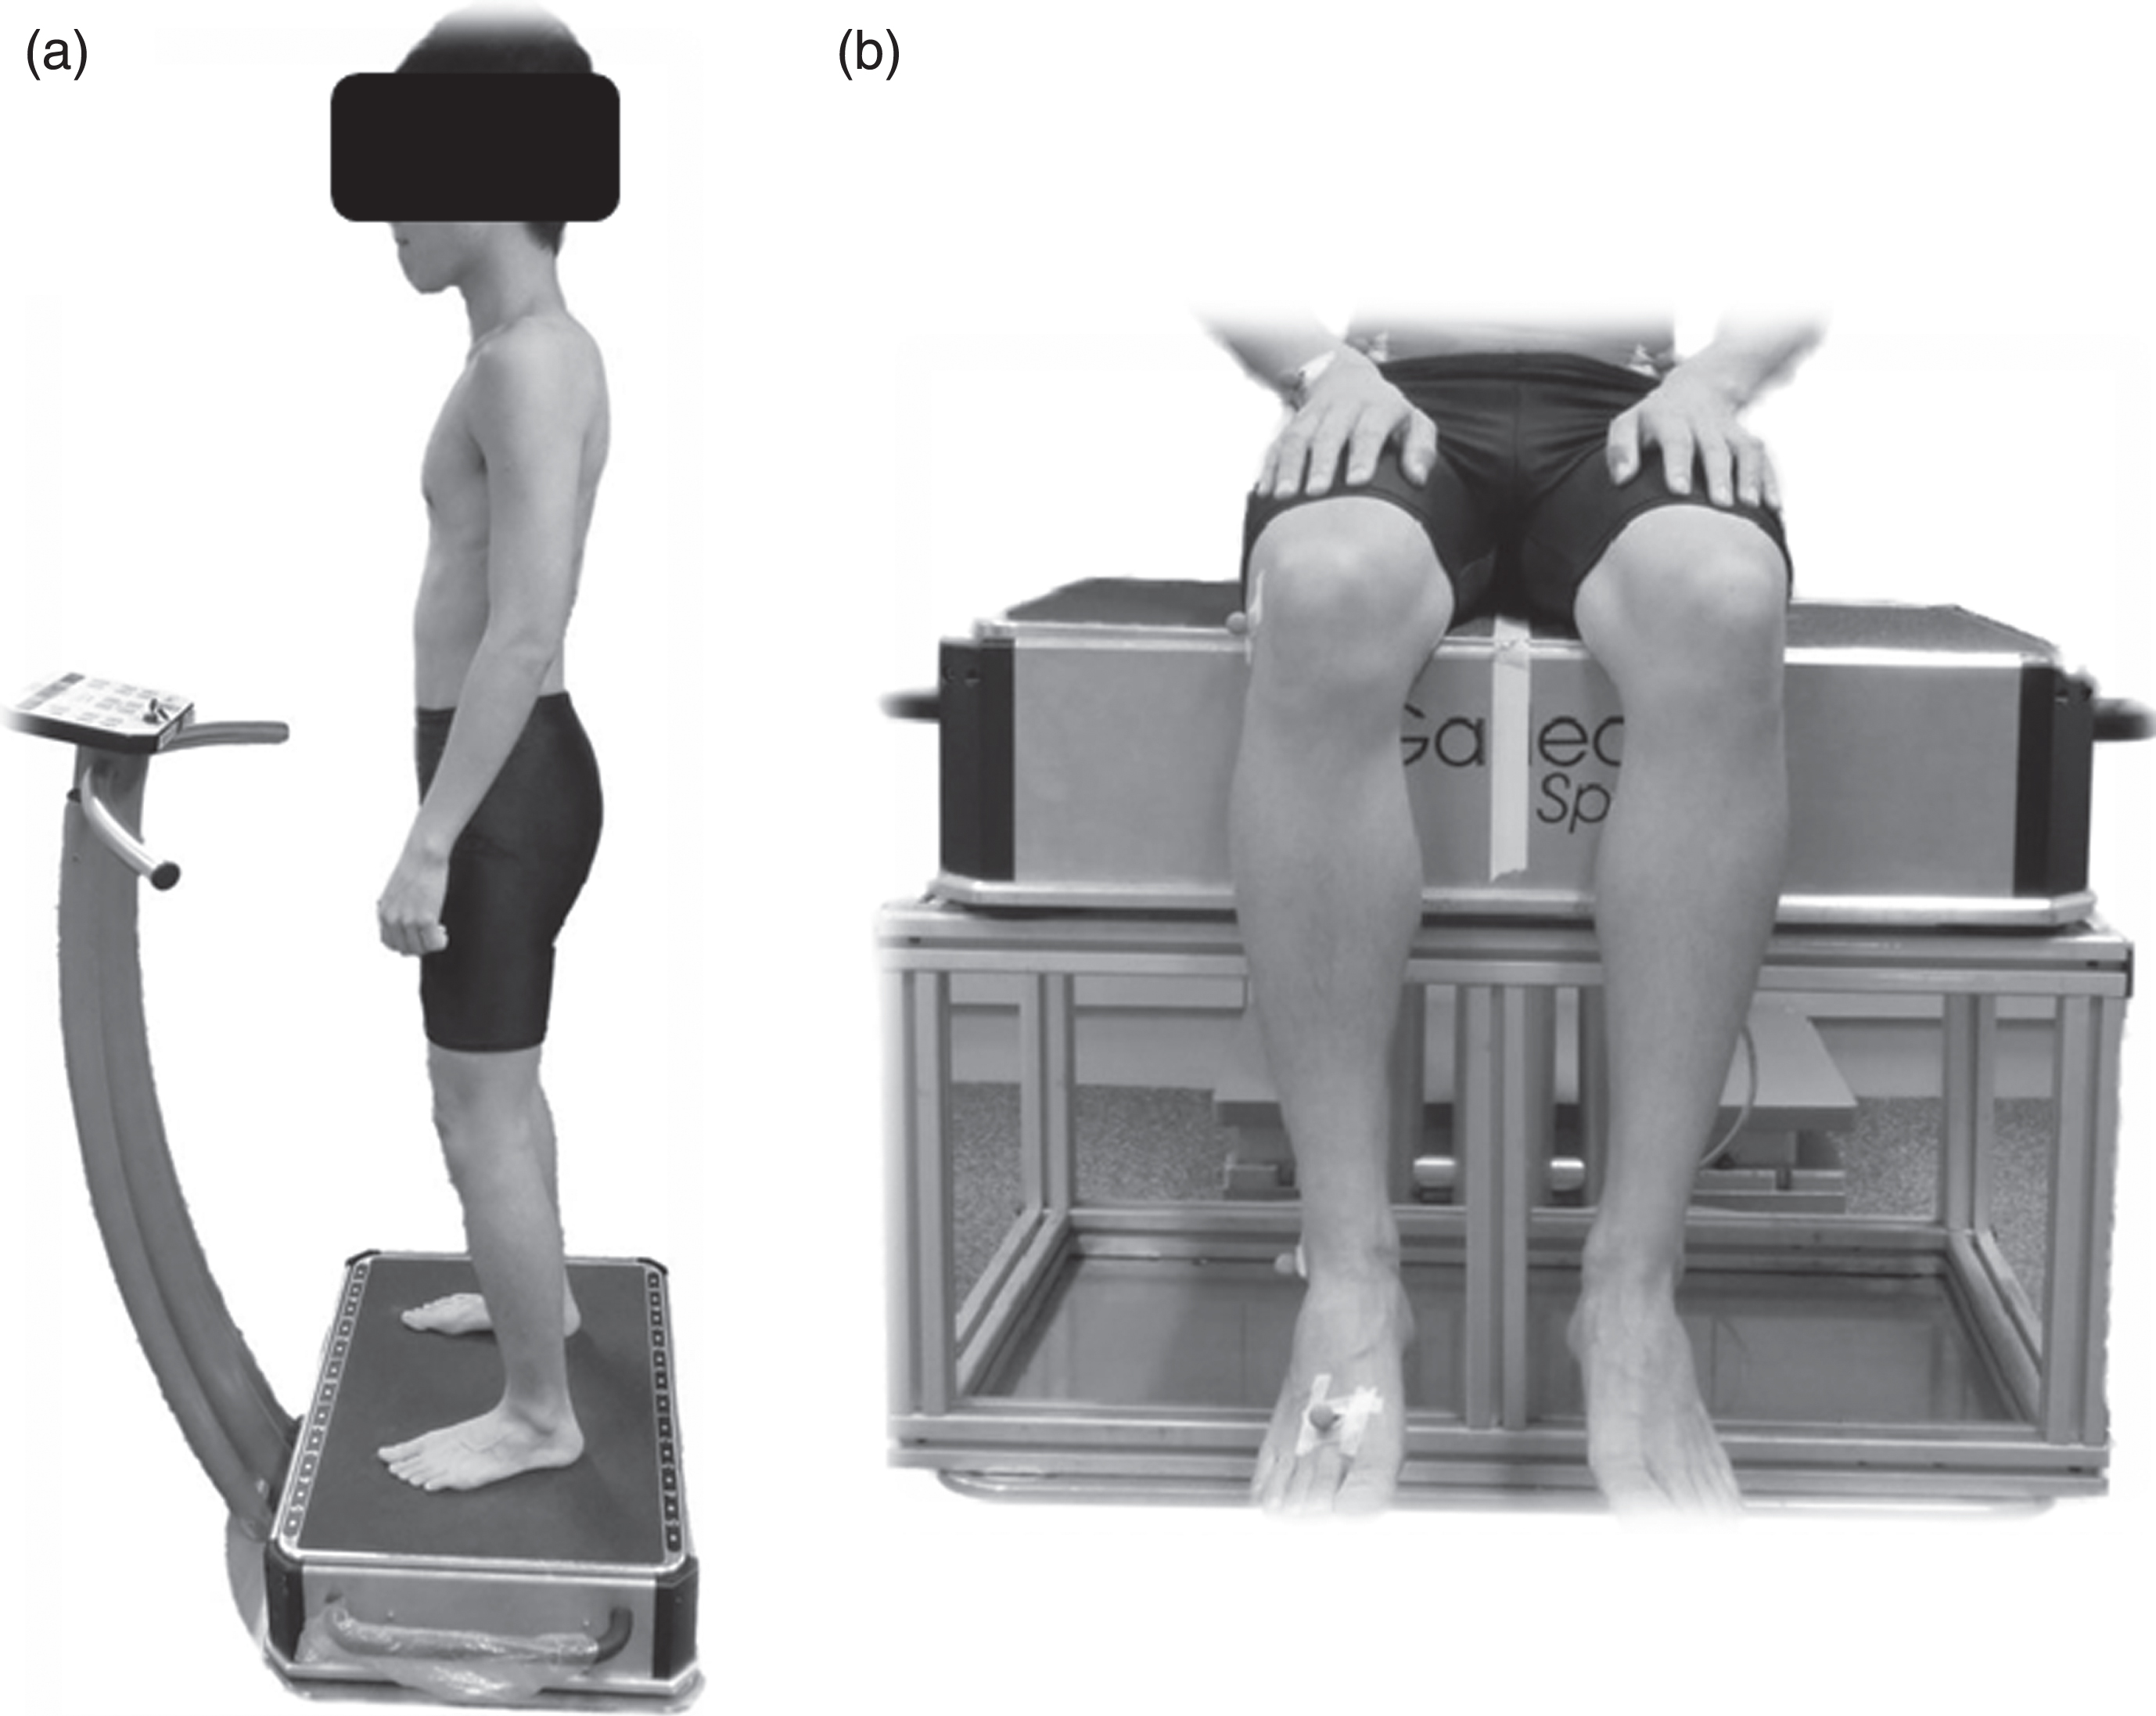 Subject under whole body vibration in (a) standing and (b) seated postures.